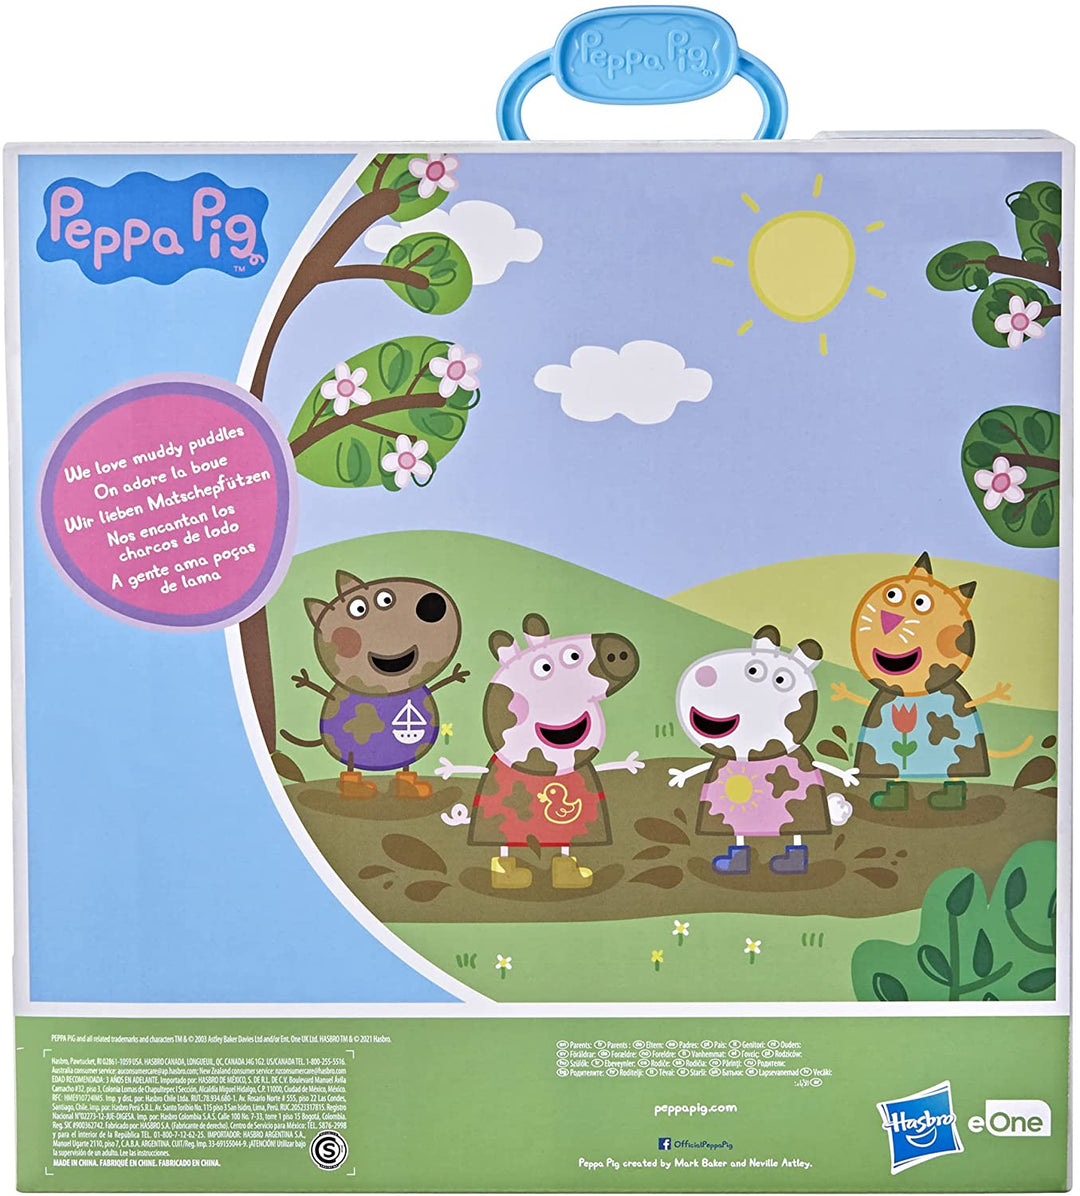 Peppa Pig Peppa&#39;s Adventures Peppa&#39;s Carry-Along Friends Case Toy